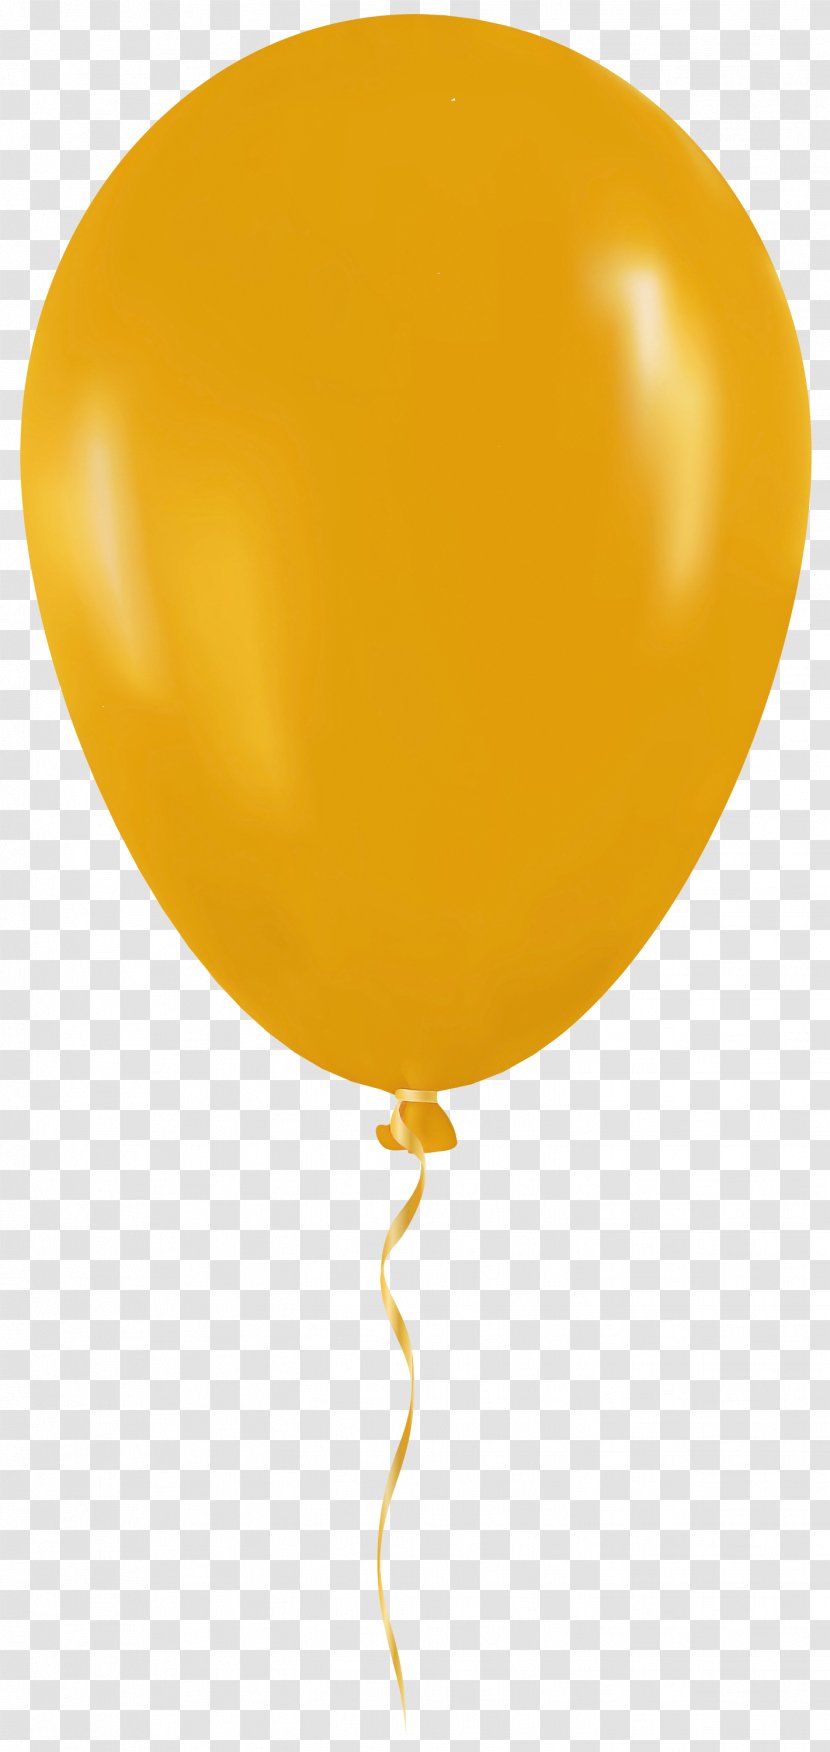 Orange - Yellow - Party Supply Transparent PNG